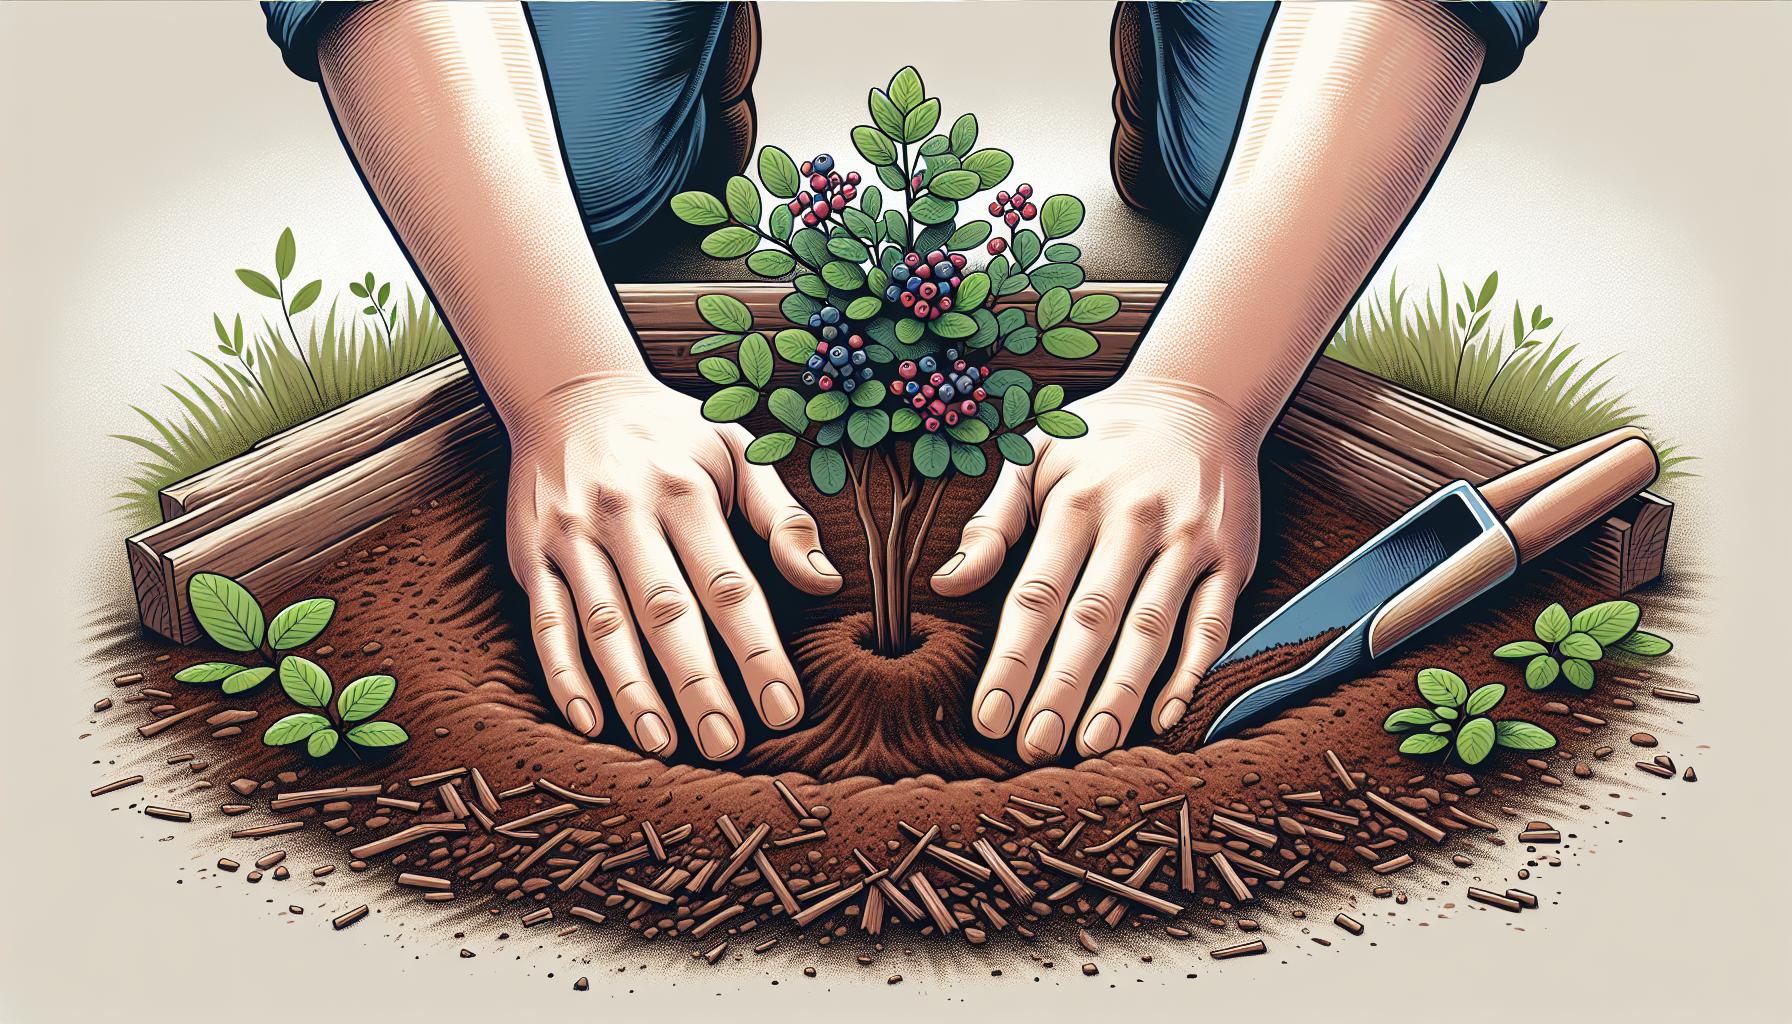 eco friendly agriculture concept illustration